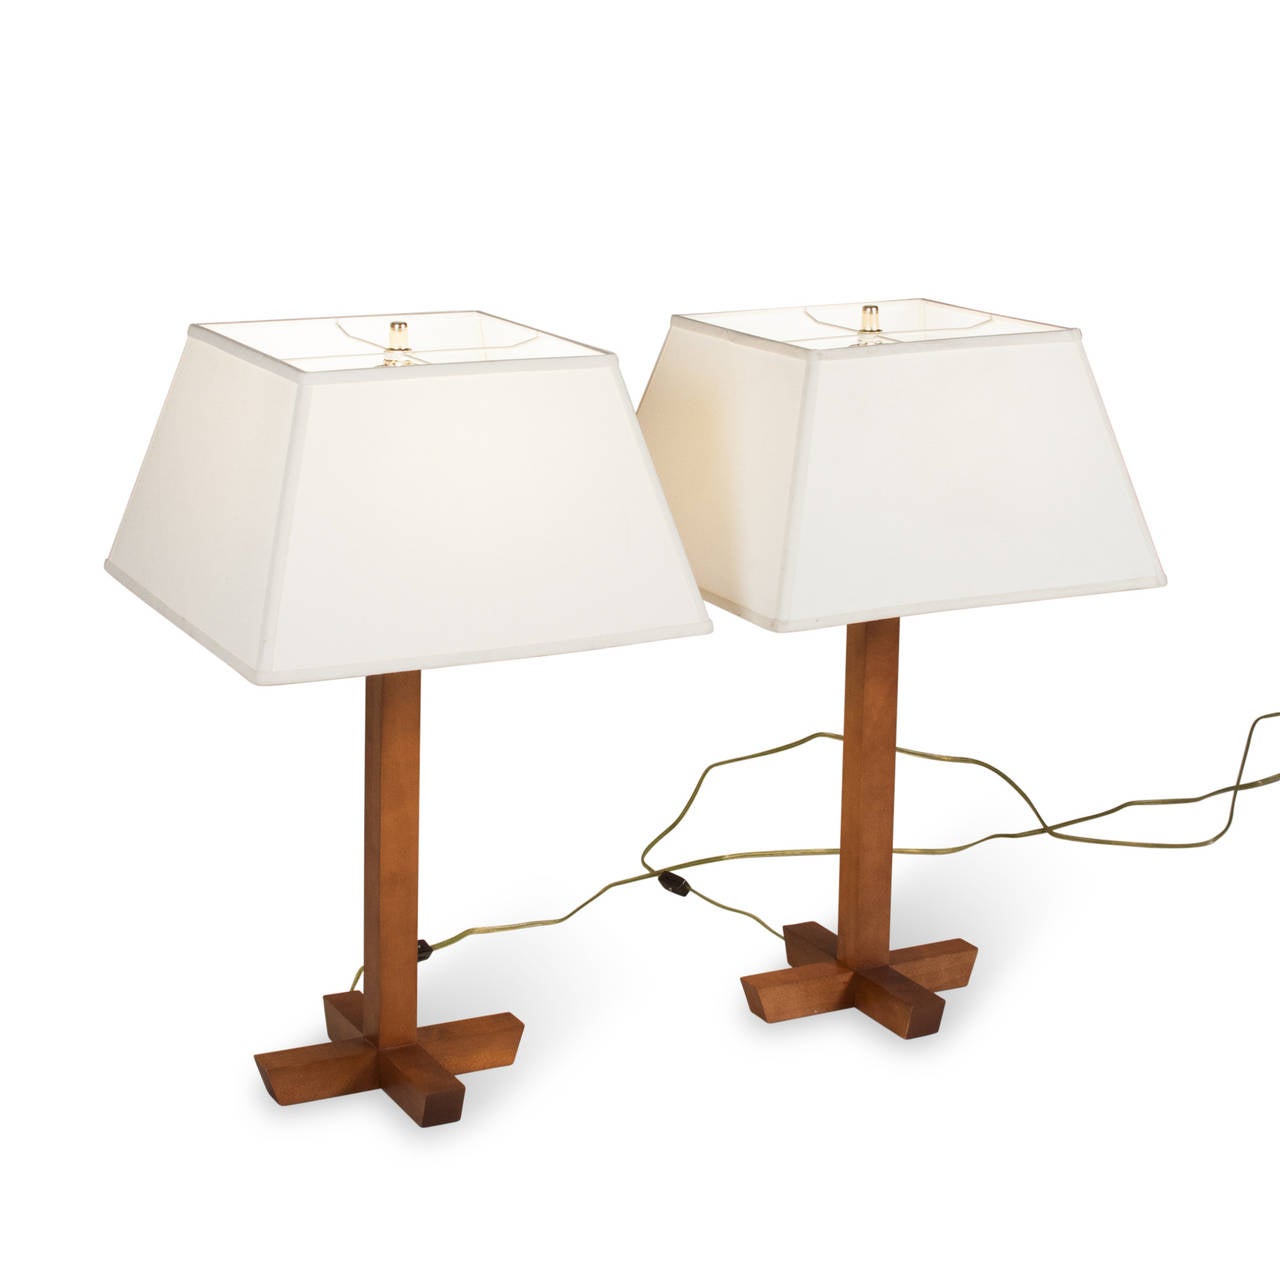 Pair of 1970s Walnut Table Lamps In Good Condition For Sale In Brooklyn, NY